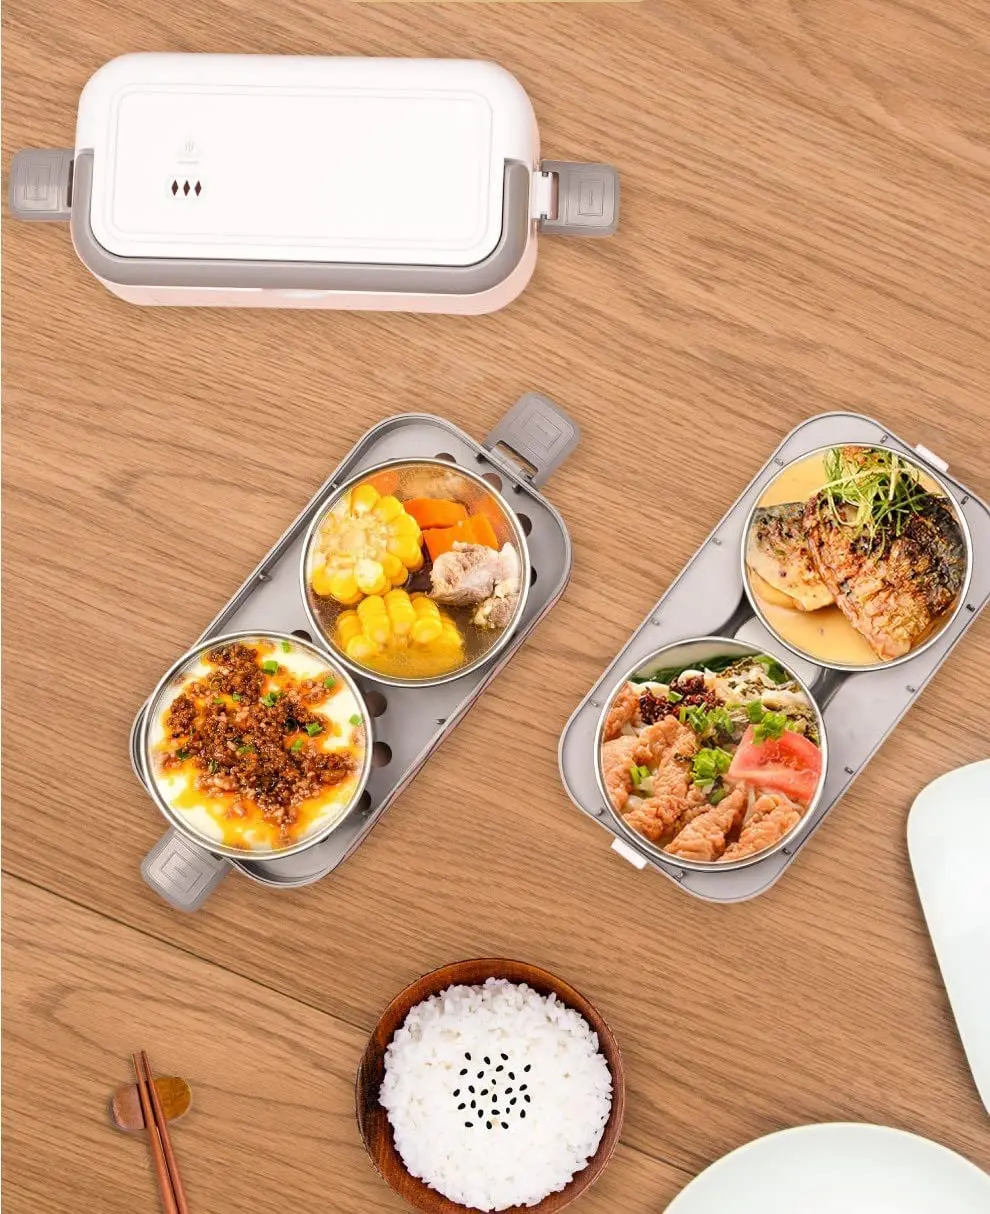 https://ae01.alicdn.com/kf/S119462abea814b52b25b26fa8901b332x/Electric-Lunch-Box-Self-Cooking-Electric-Lunch-Box-Heating-Lunch-Box-Portable-Food-Warmer-Lunch-Box.jpg